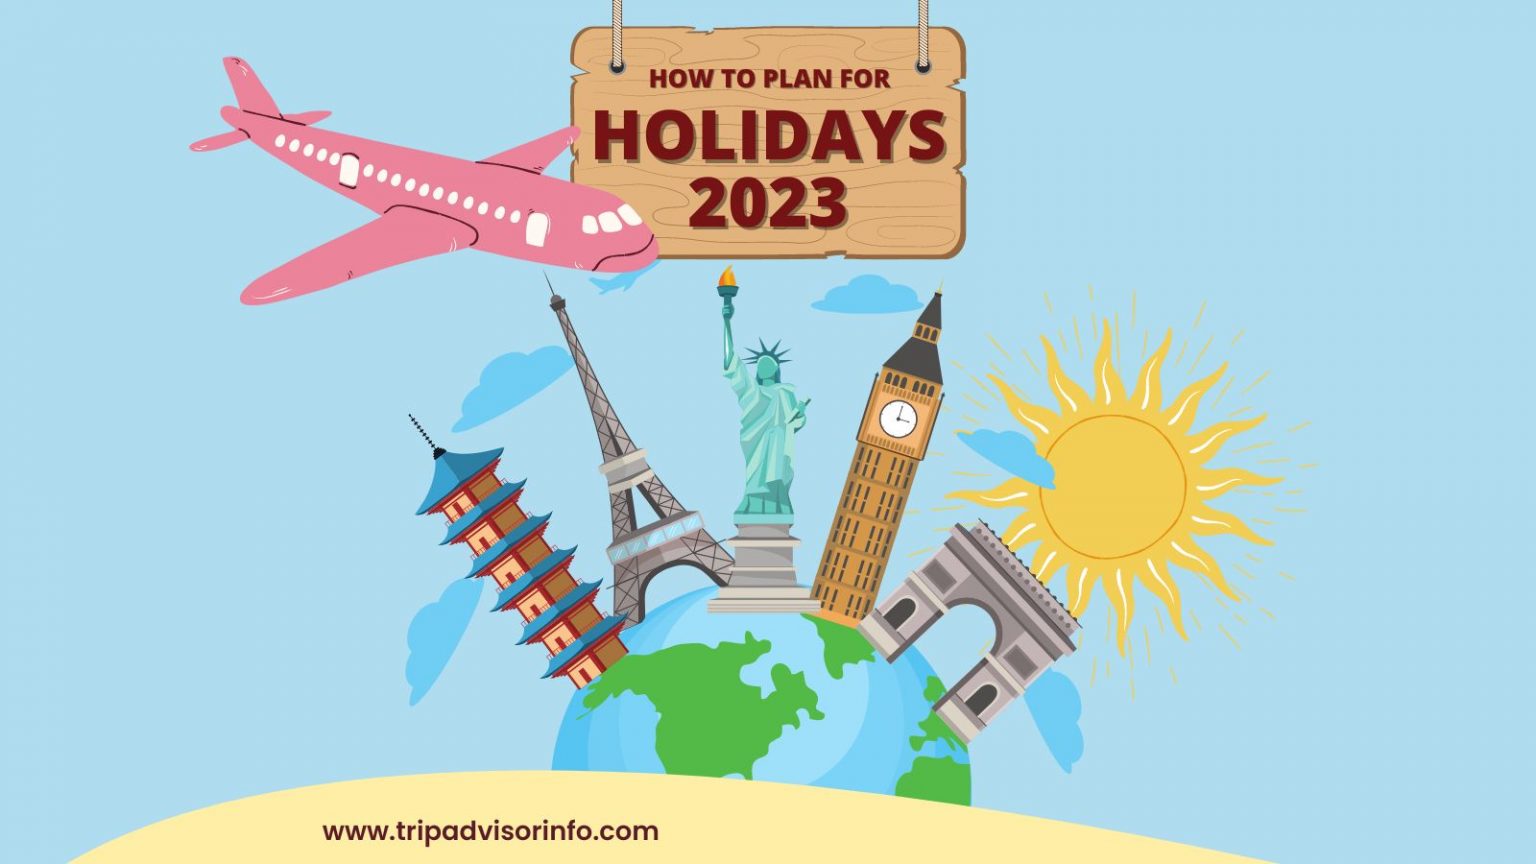 How to Plan for Holidays 2023 Best Trip Guide